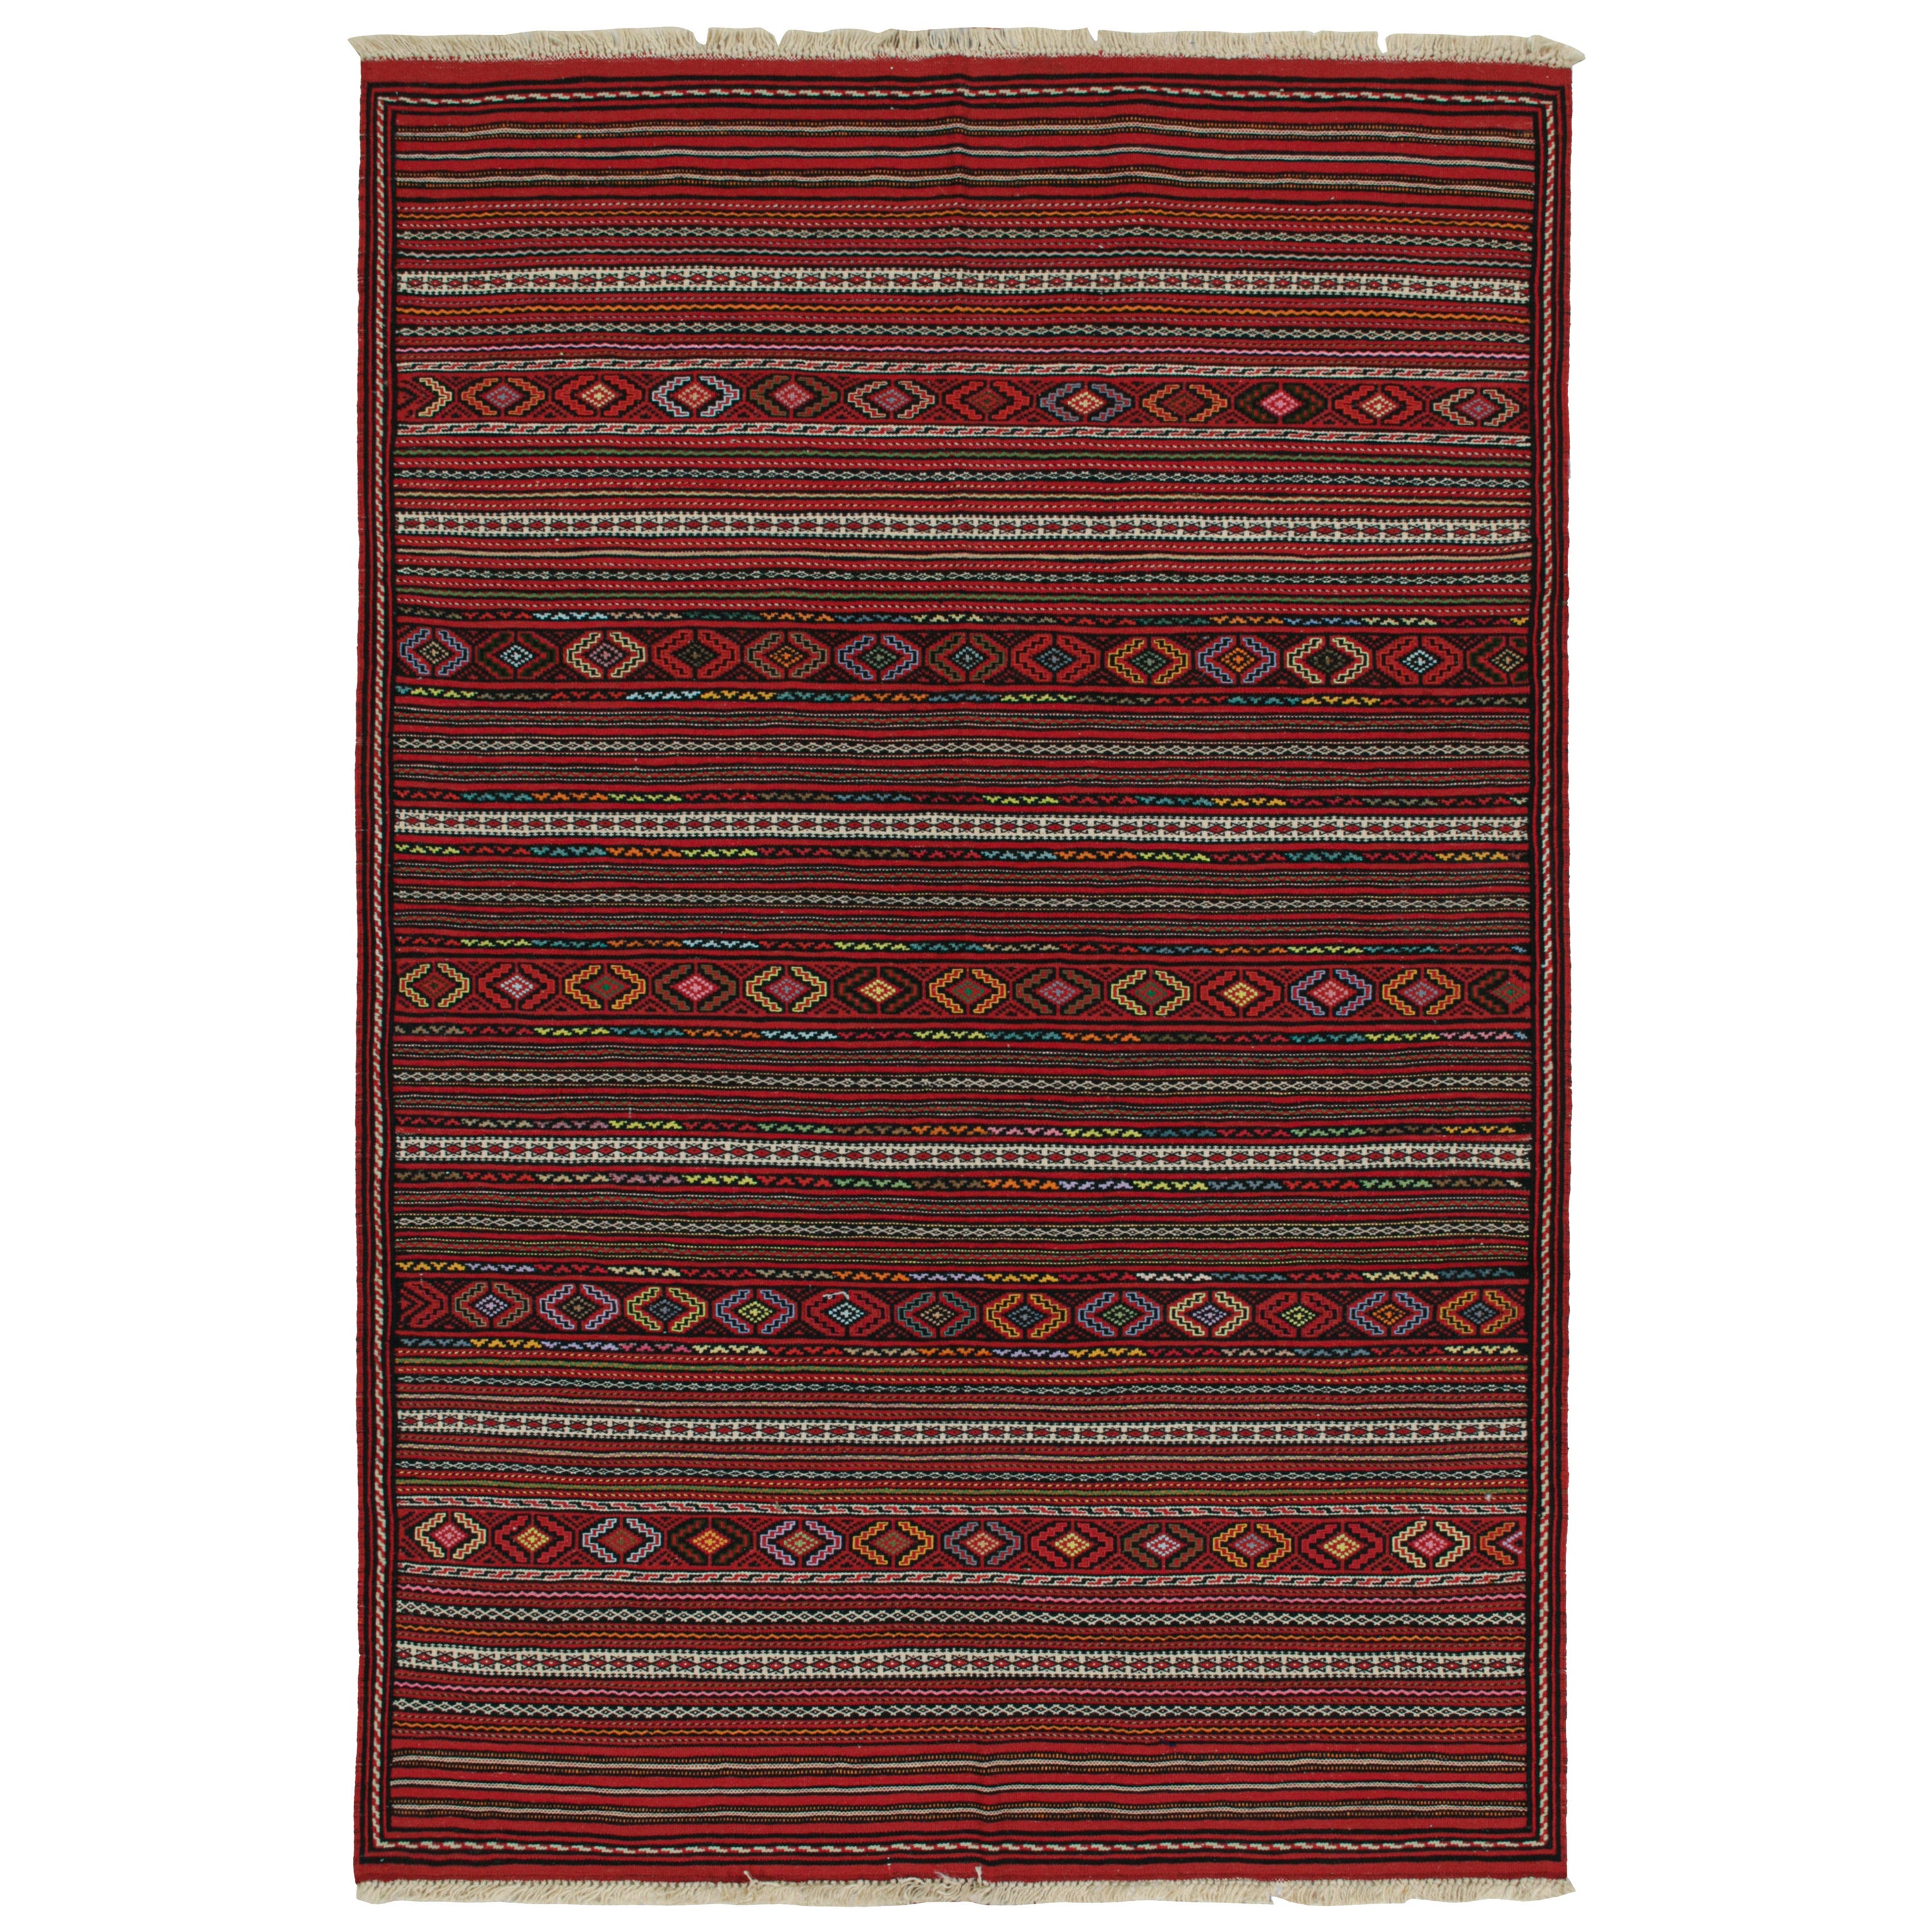 Vintage Baluch Kilim in Red with Stripes & Geometric Patterns, from Rug & Kilim For Sale